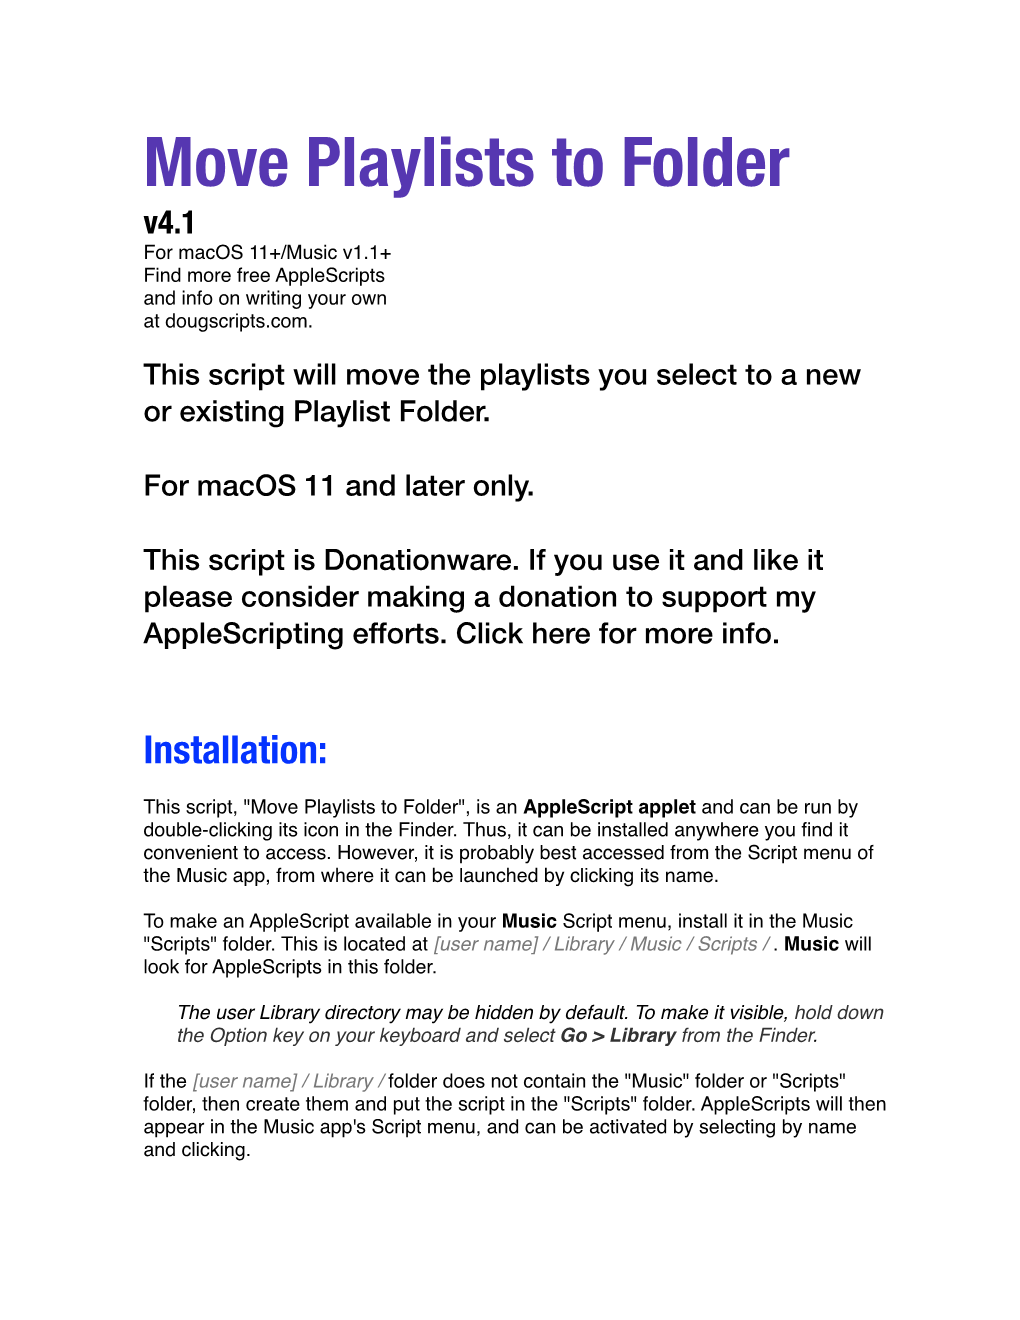 Move Playlists to Folder V4.1 for Macos 11+/Music V1.1+ Find More Free Applescripts and Info on Writing Your Own at Dougscripts.Com